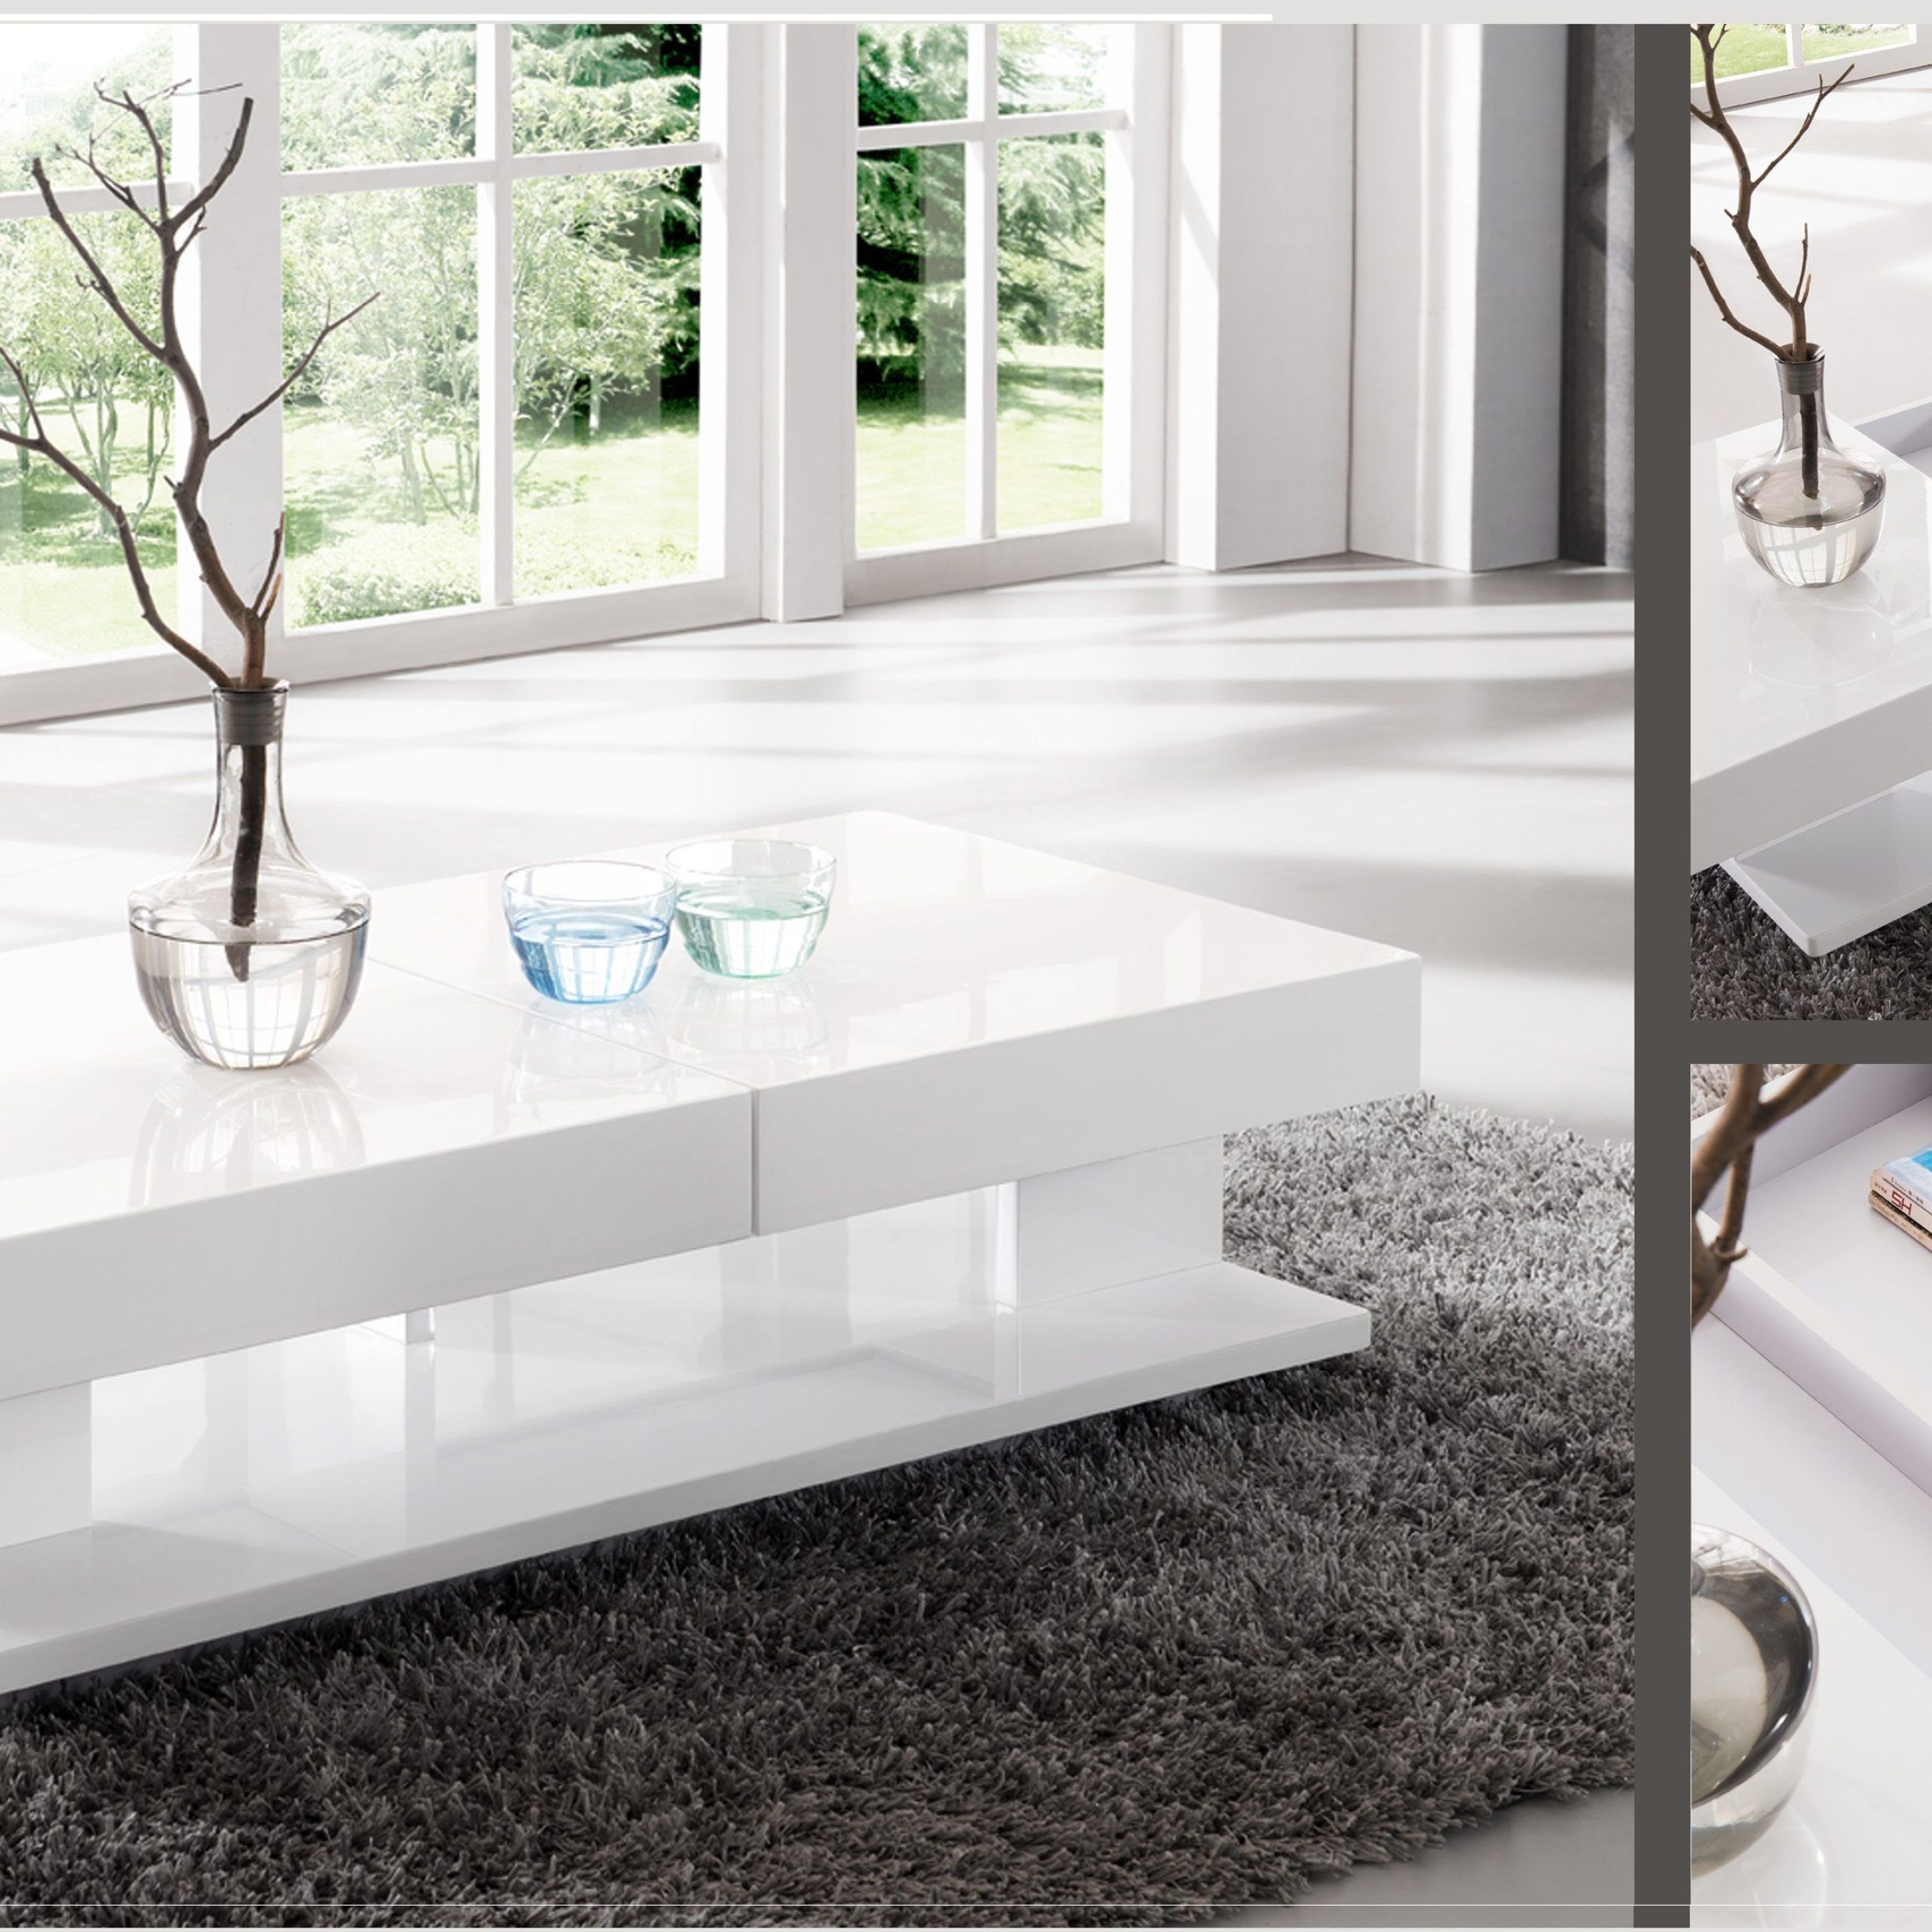 Verona Extending High Gloss Coffee Table With Storage In White | Fif Throughout High Gloss Lift Top Coffee Tables (View 10 of 15)